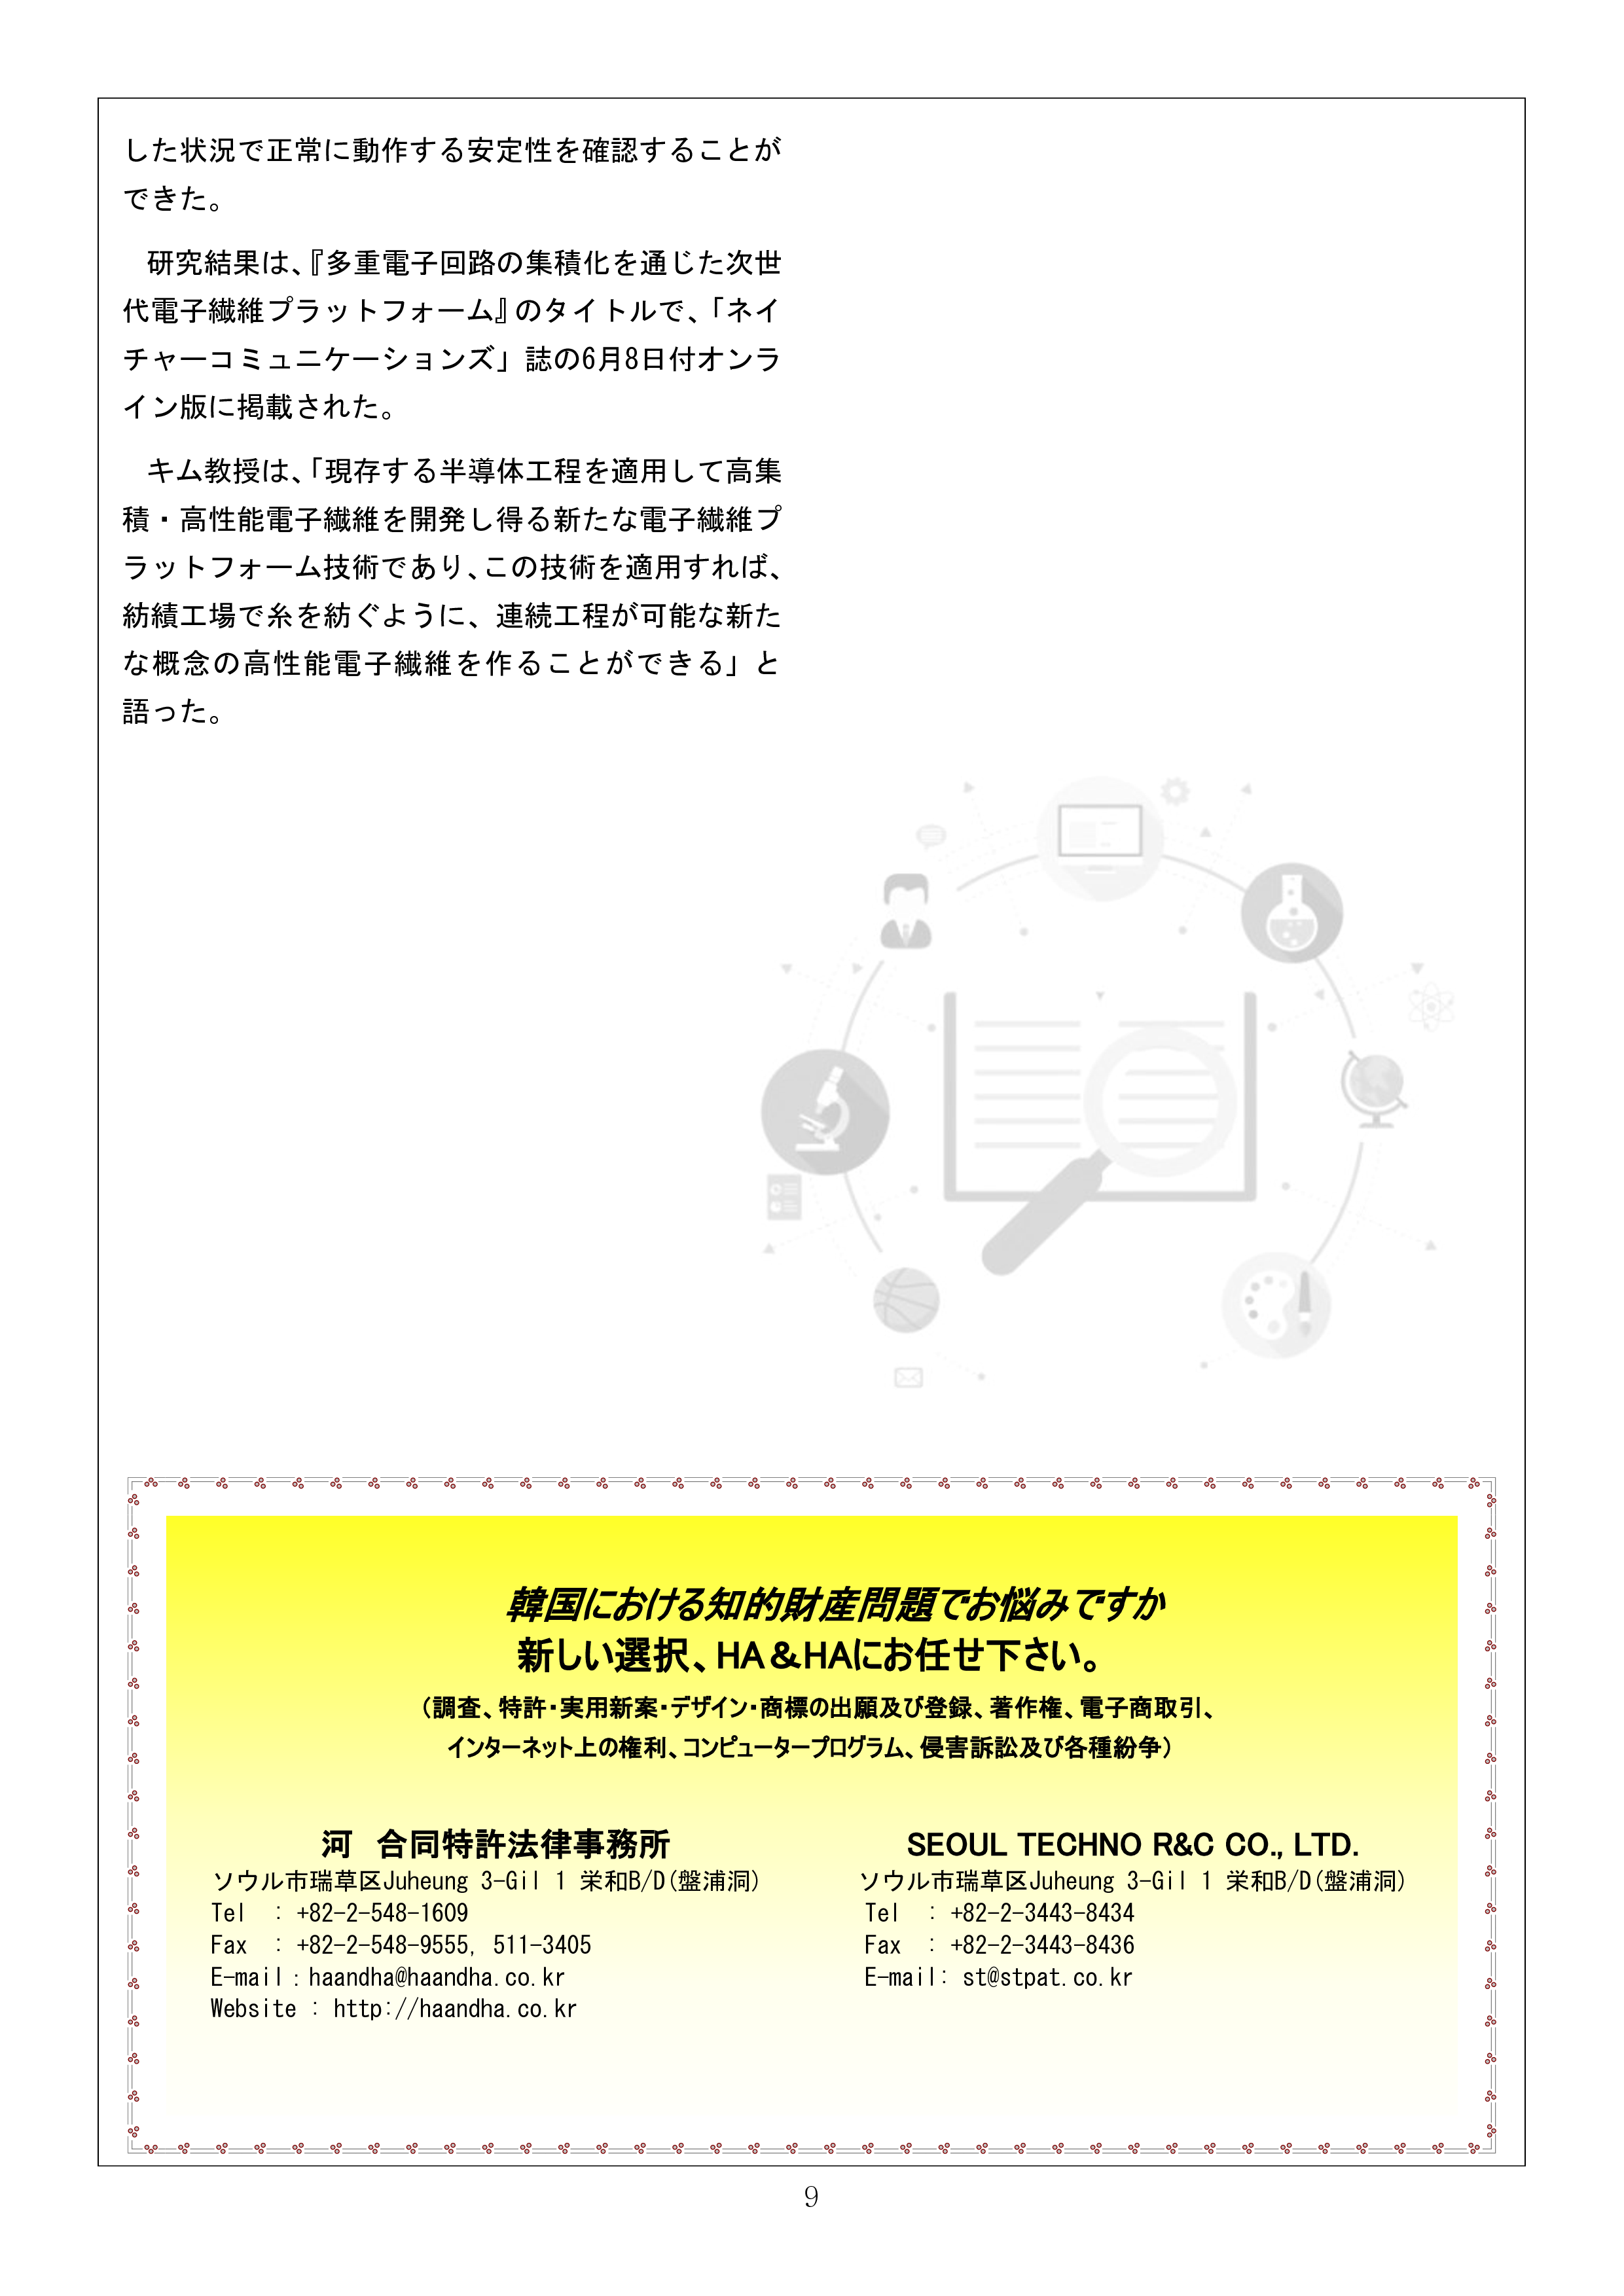 Newsletter_202207_9.png